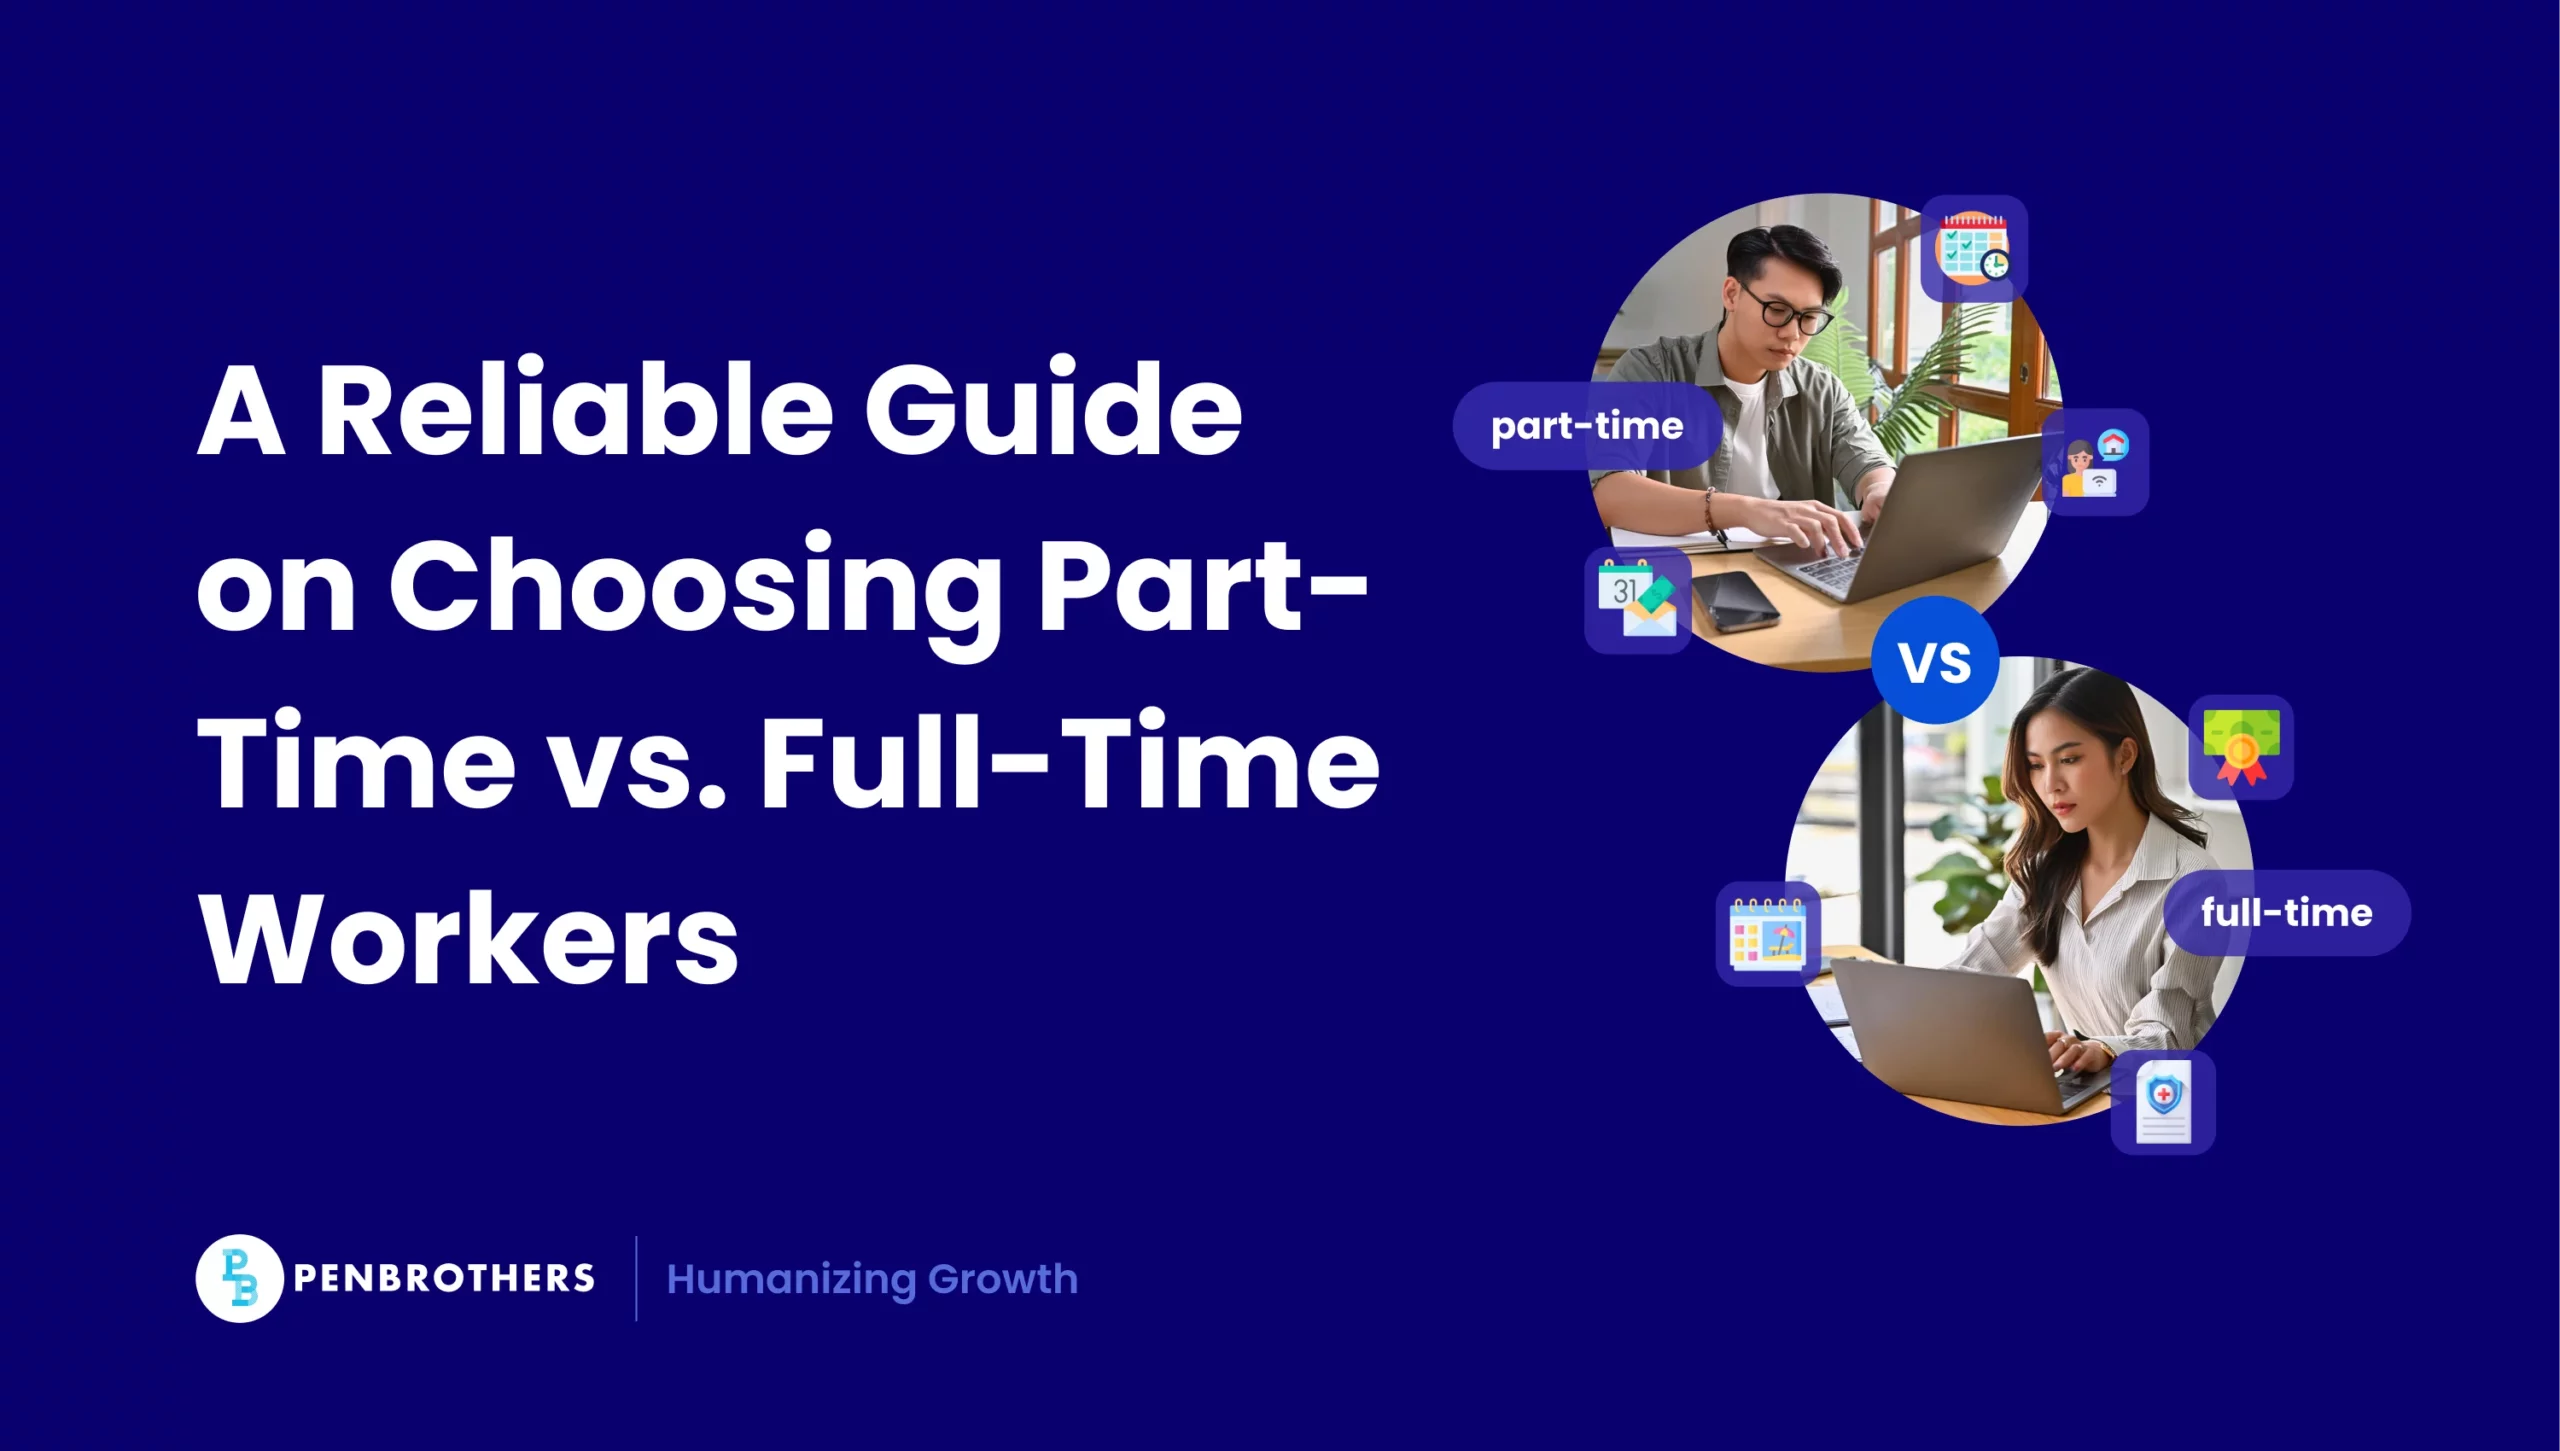 A Reliable Guide on Choosing Part-Time vs. Full-Time Workers